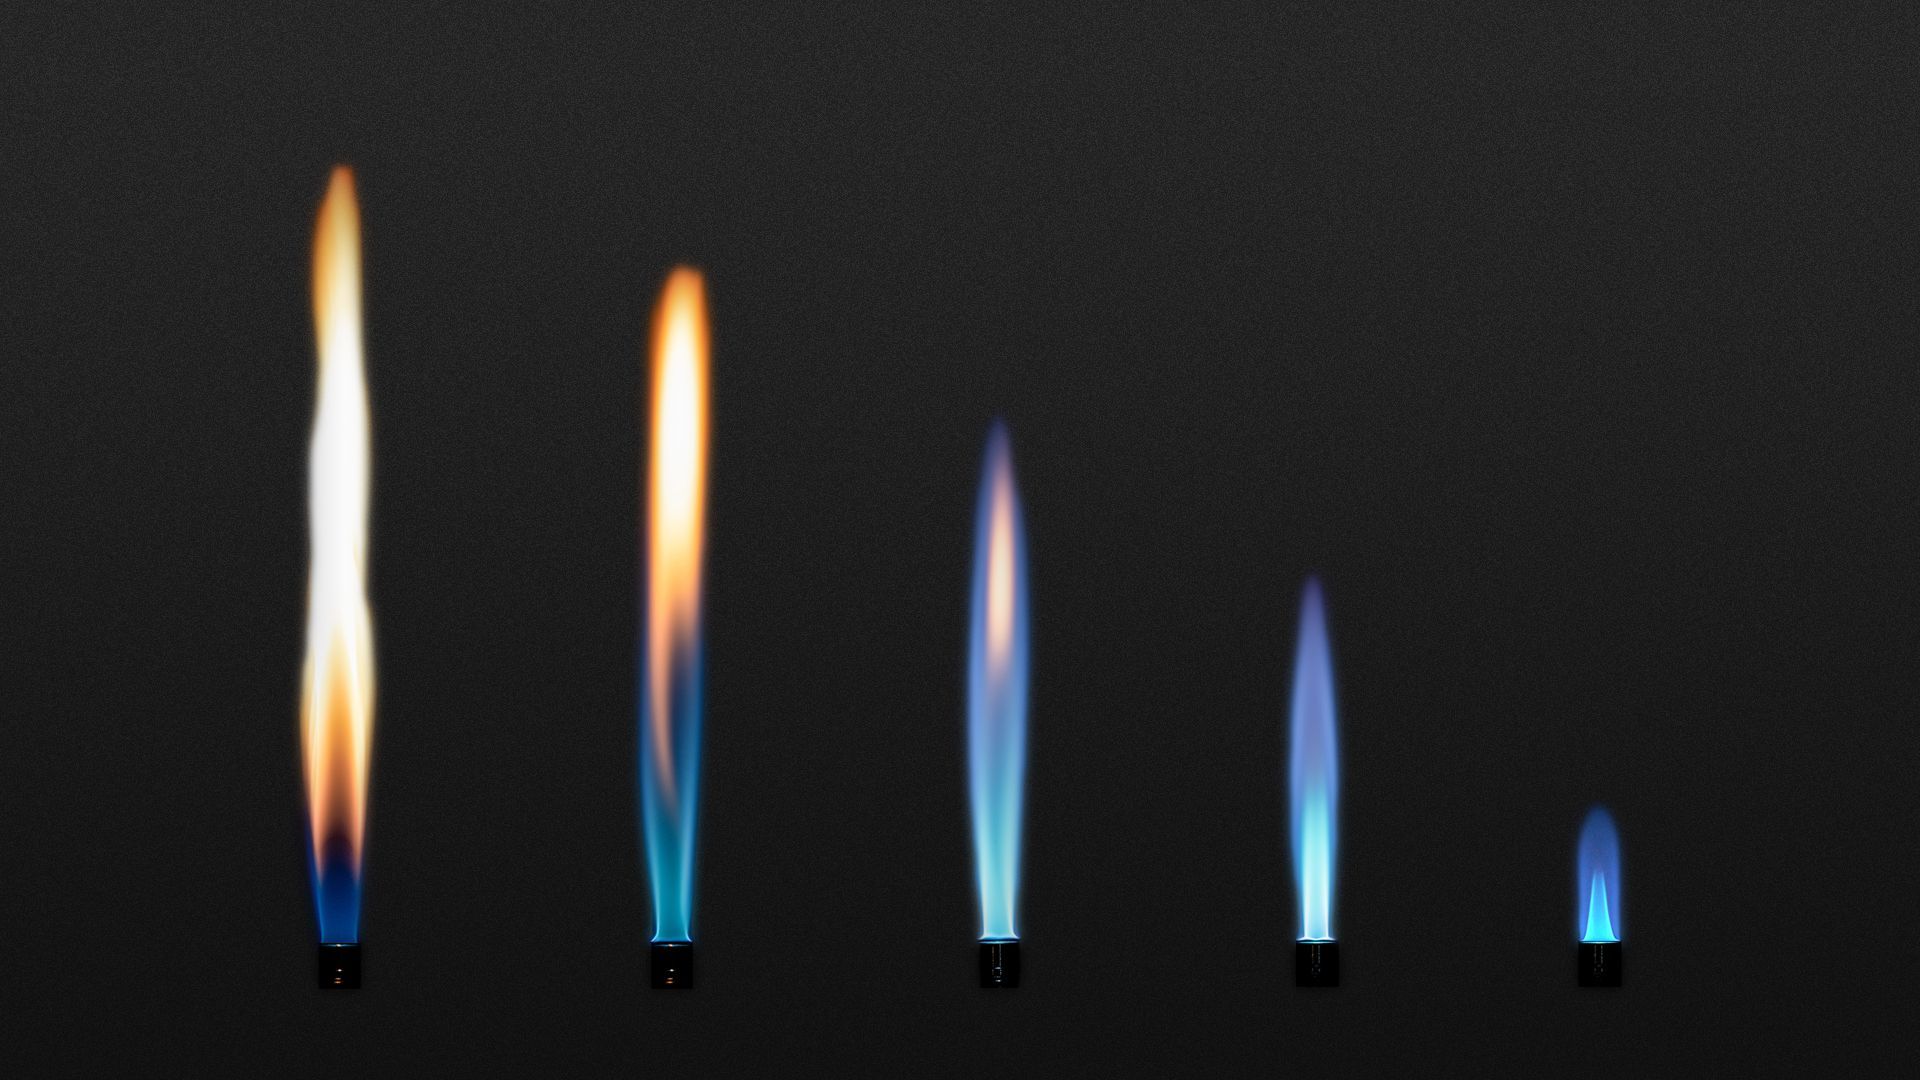 Illustration of a row of gas flames, descending in height